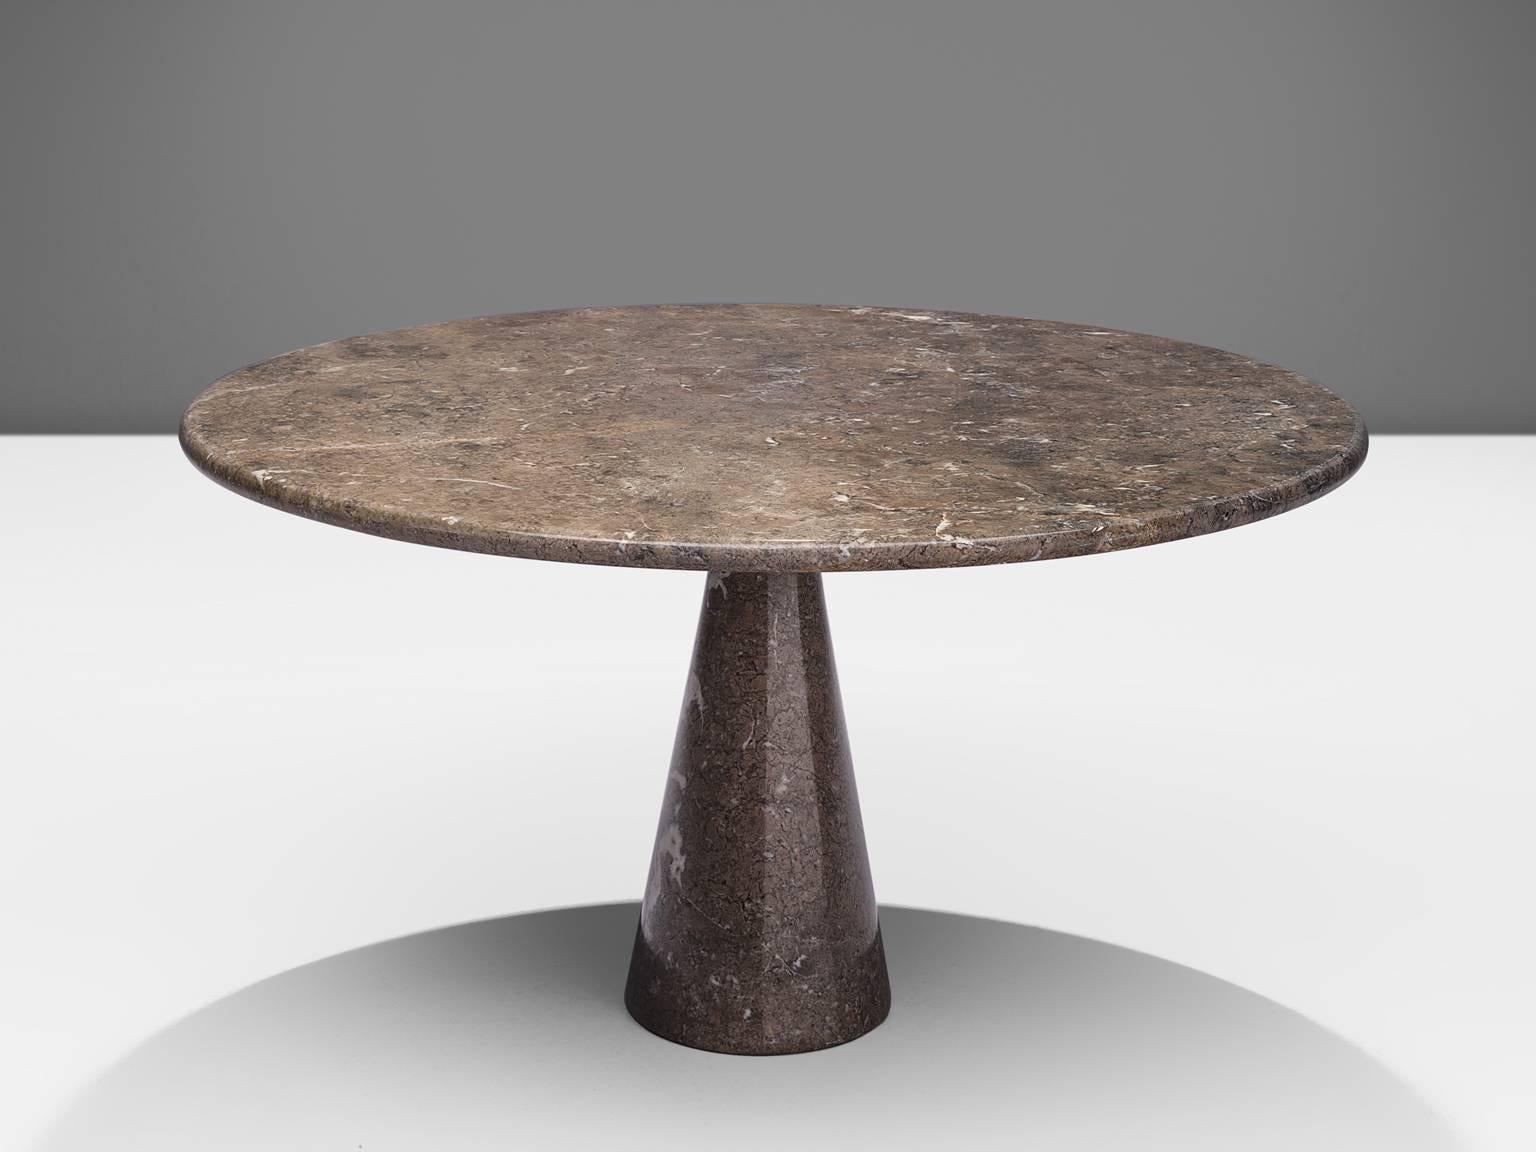 Angelo Mangiarotti for Skipper, table M1, marble, Italy, 1969

This table is part of our midcentury collection. The patterned brown to greyish table has a cone shaped base and a circular top. The circular top rests perfectly on the cone. The